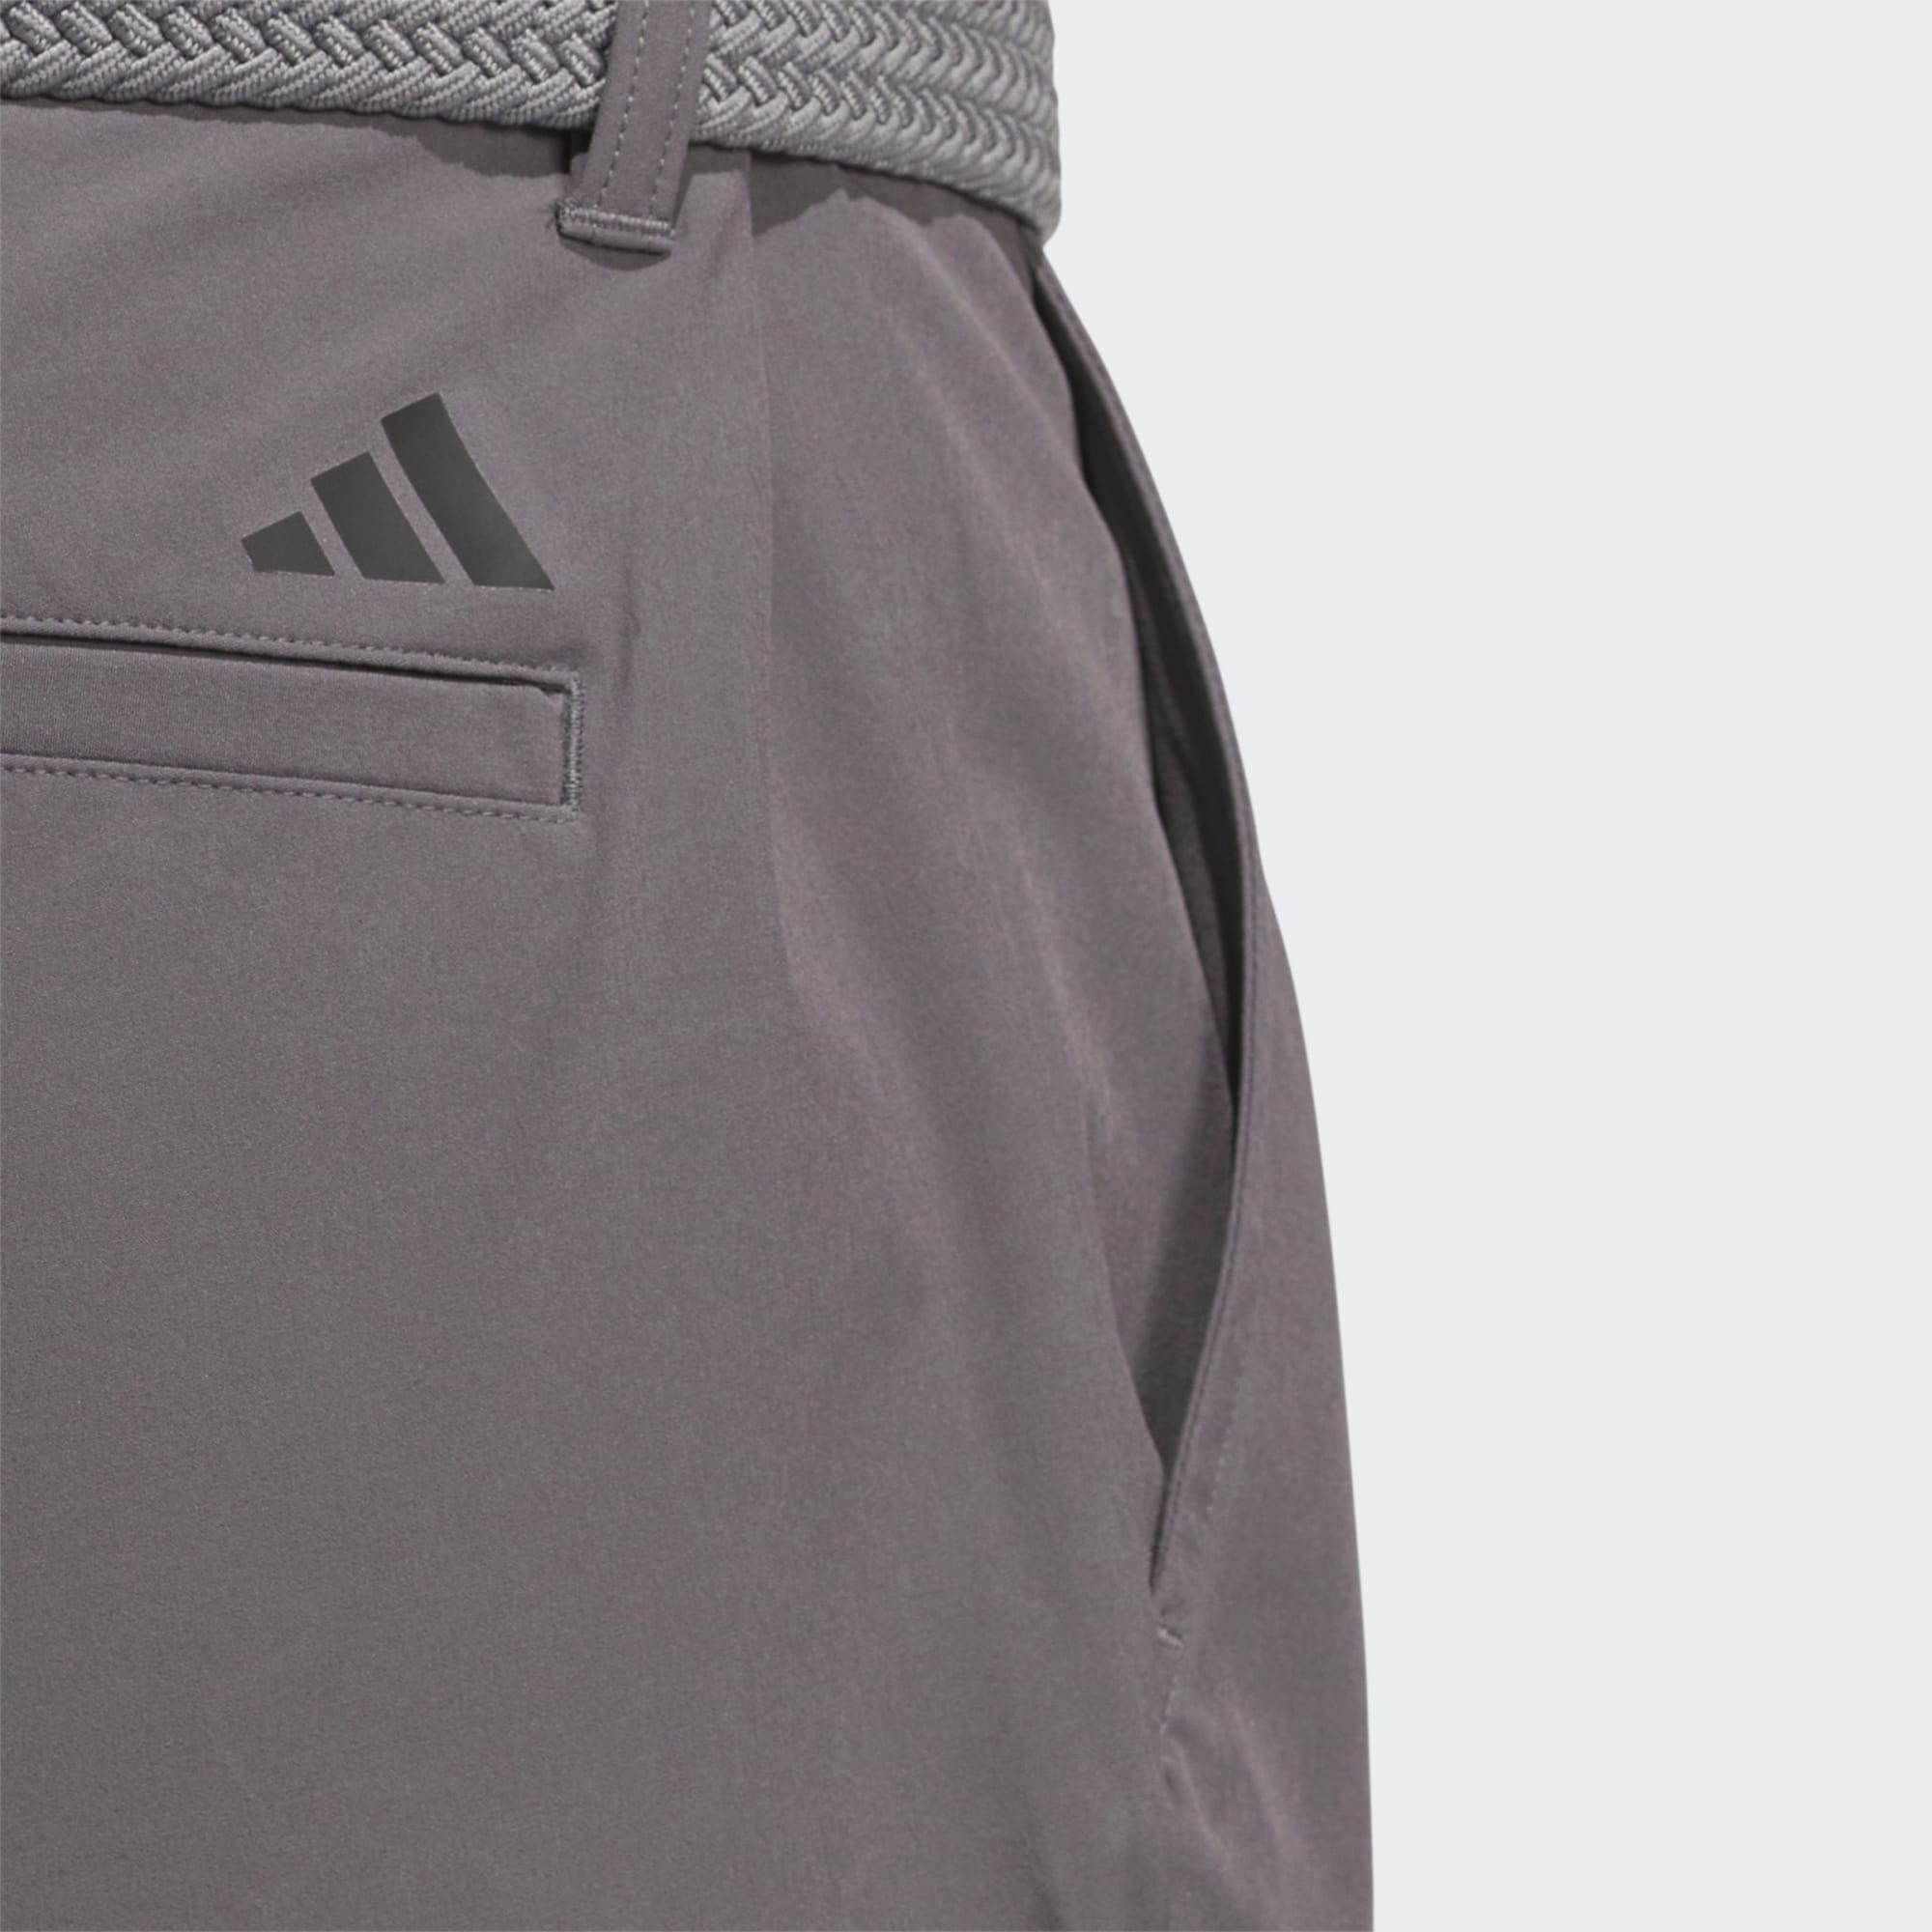 Golfhose Grey adidas TAPERED ULTIMATE365 Five Performance GOLFHOSE